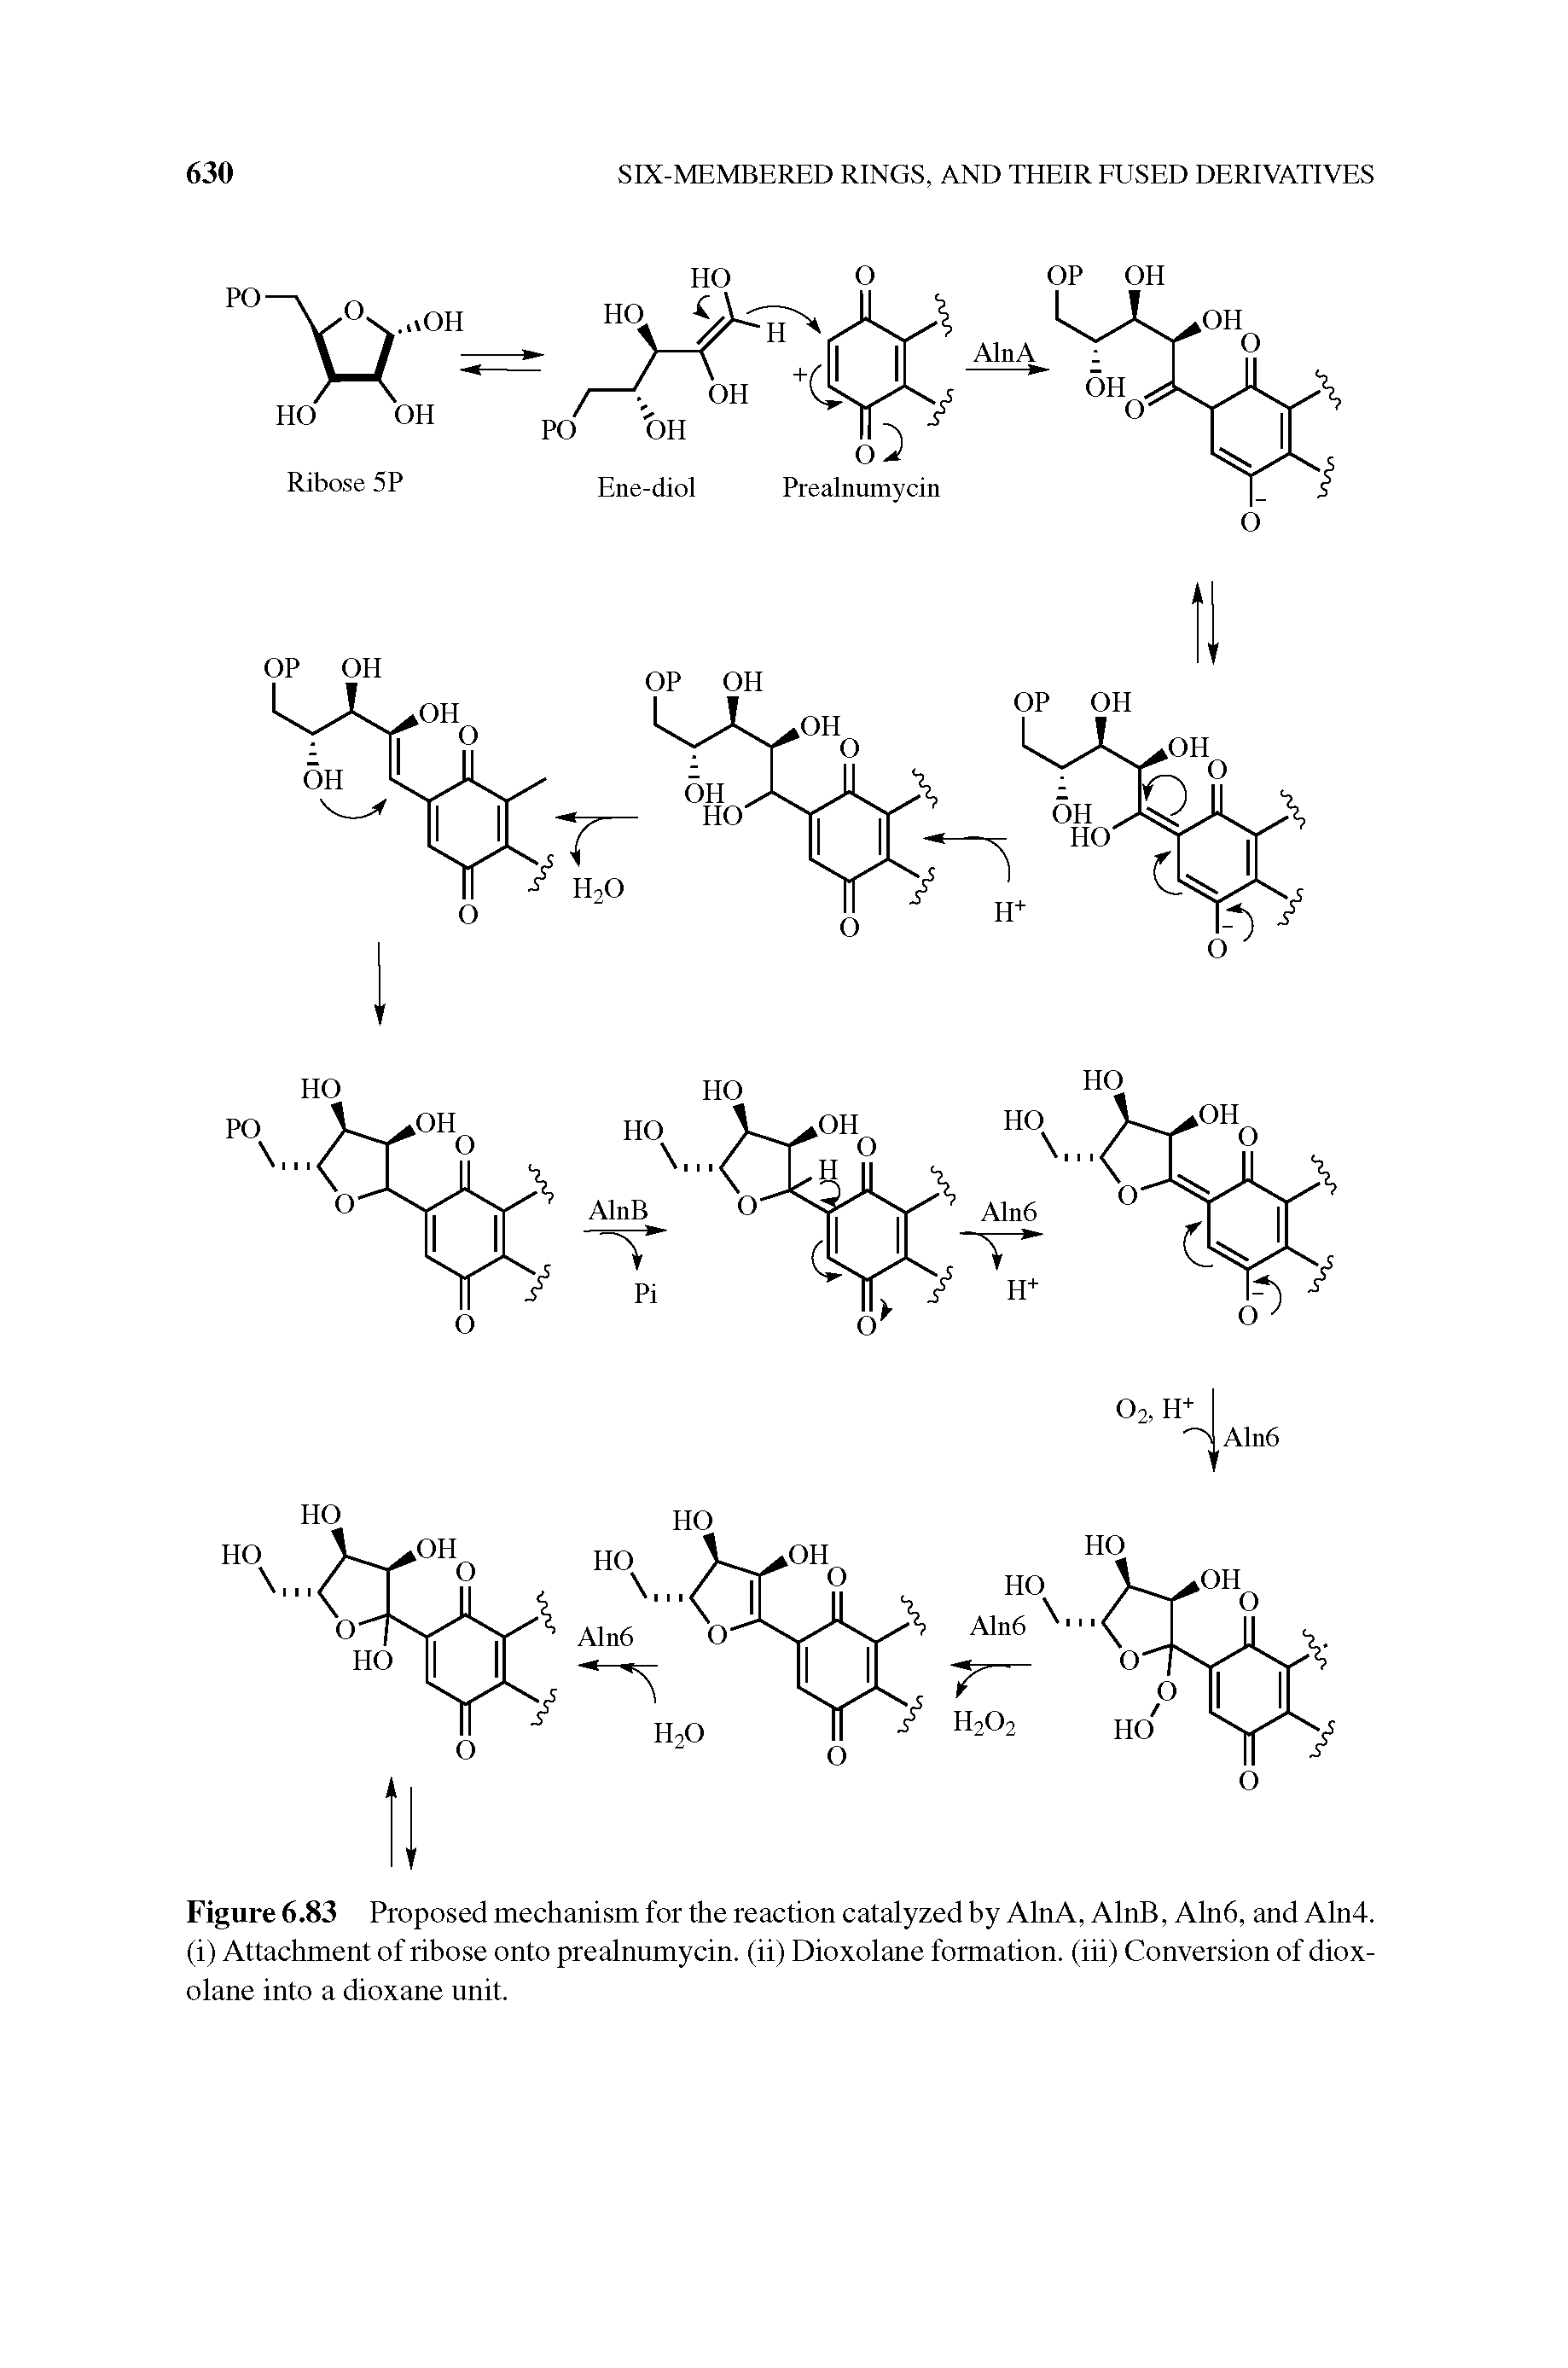 Figure 6.83 Proposed mechanism for the reaction catalyzed by AlnA, AlnB, Aln6, and Aln4. (i) Attachment of ribose onto prealnumycin. (ii) Dioxolane formation, (iii) Conversion of diox-olane into a dioxane unit.